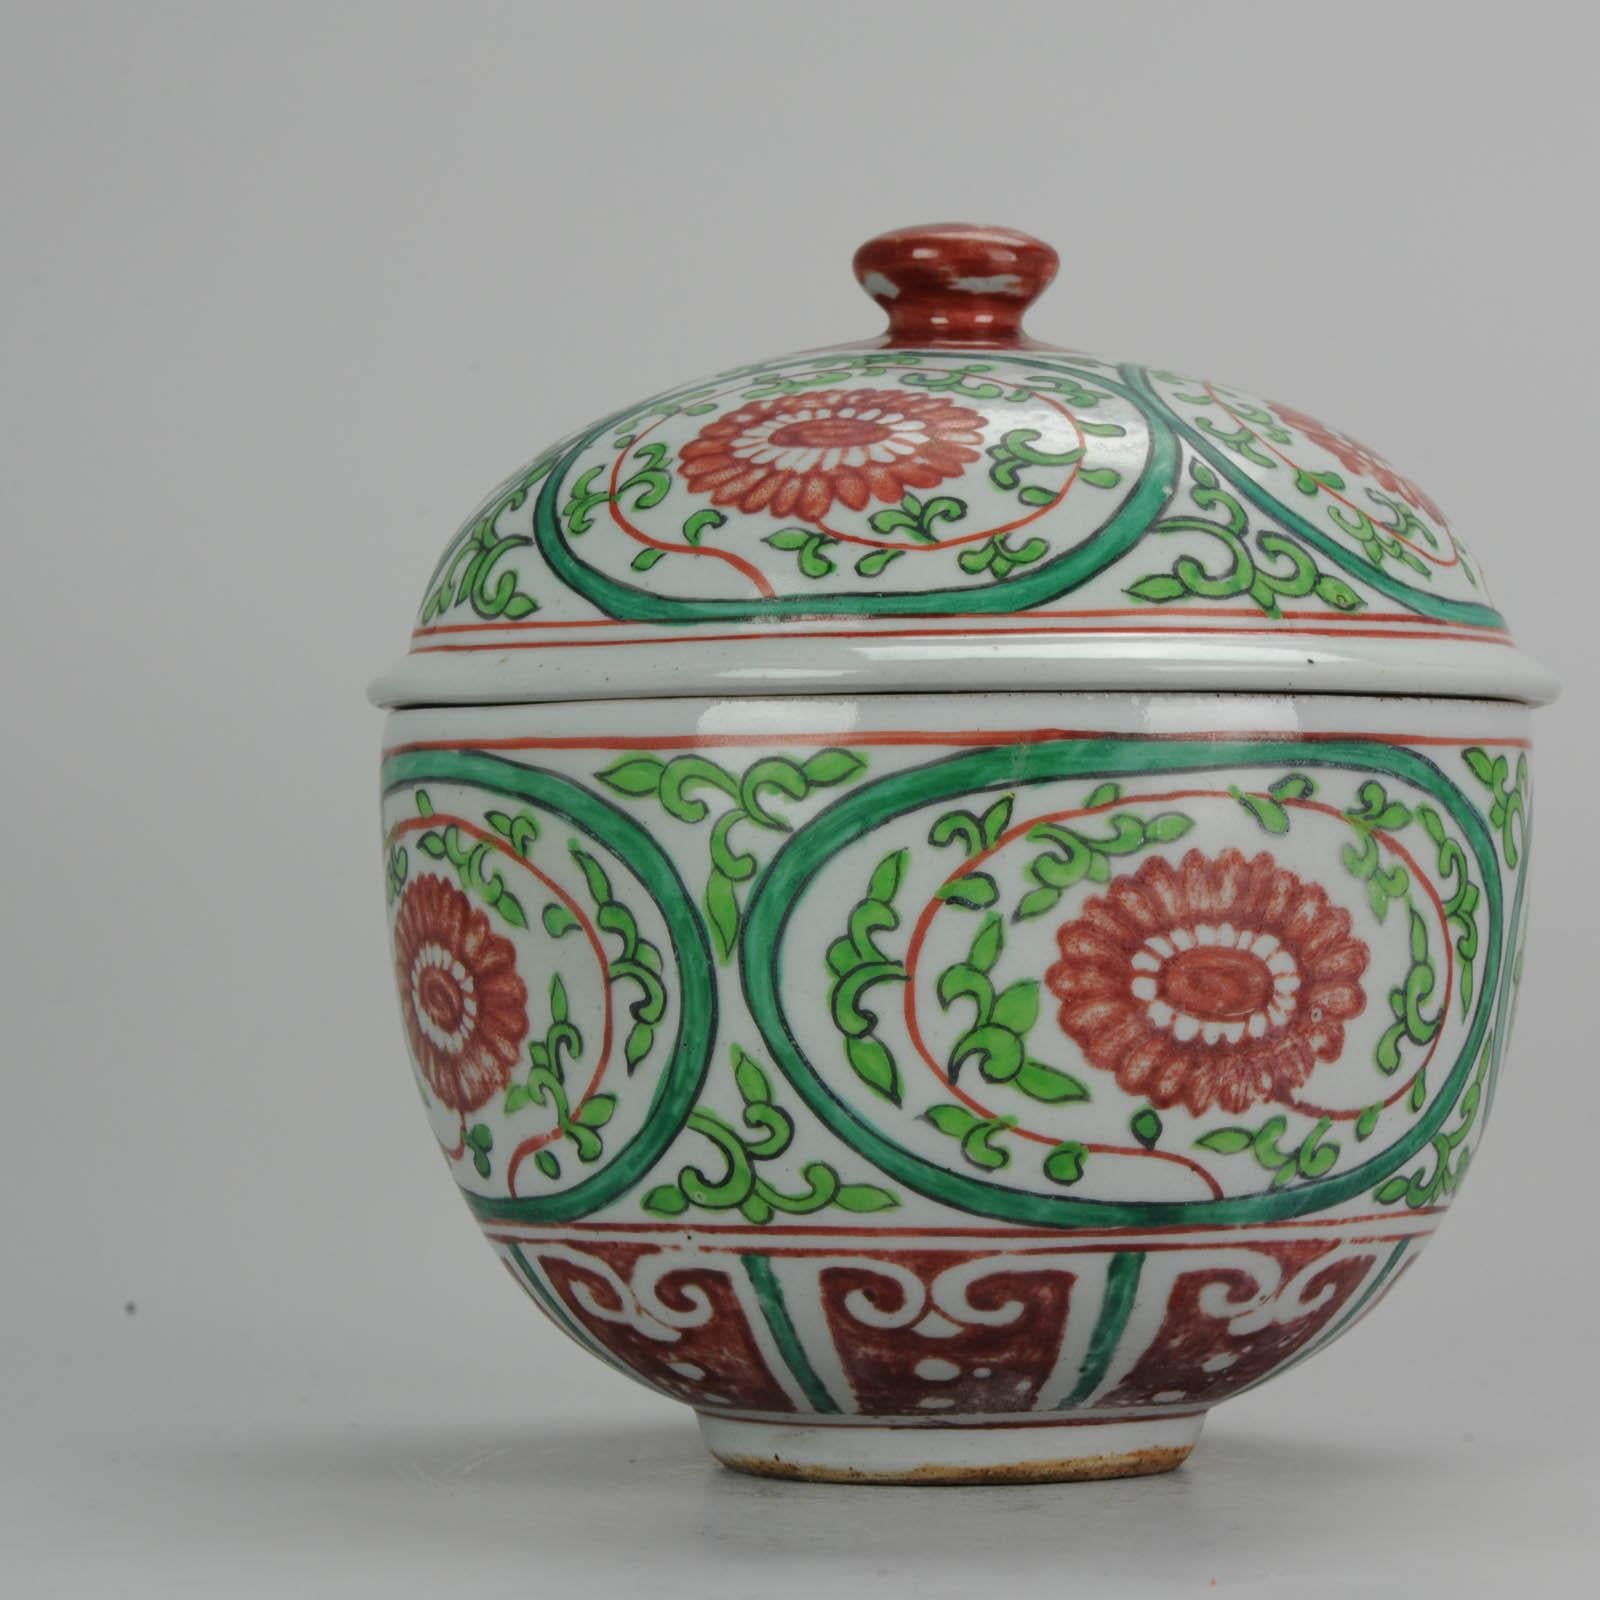 Antique Chinese Porcelain Jar 18th Century SE Asian Thai Market Bencharong Peony For Sale 3